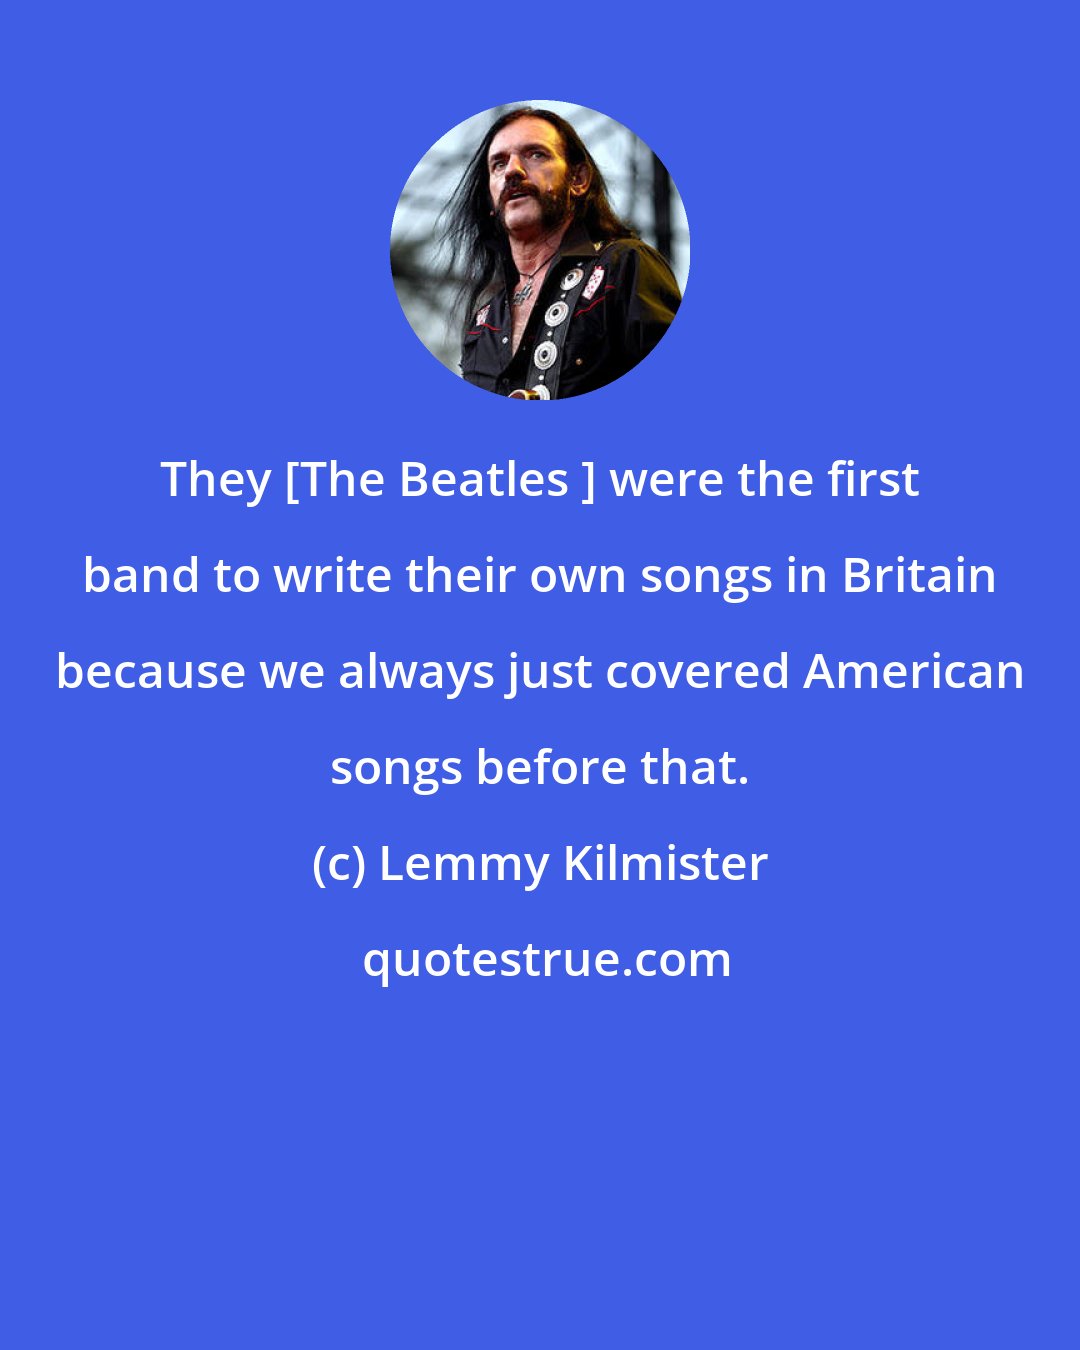 Lemmy Kilmister: They [The Beatles ] were the first band to write their own songs in Britain because we always just covered American songs before that.